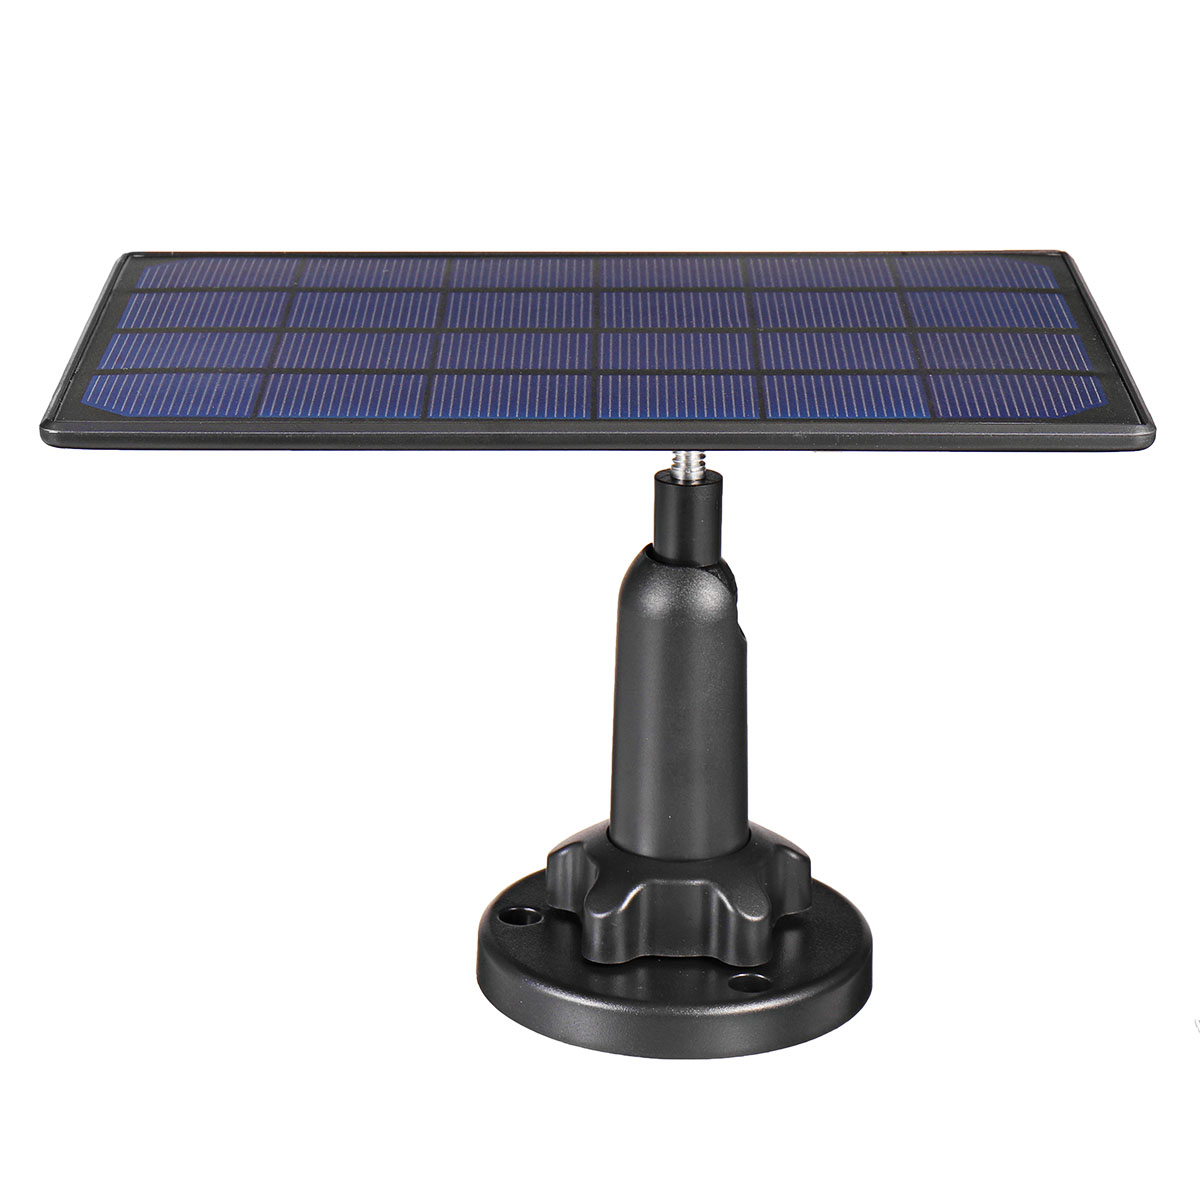 5V-High-Efficiency-Waterproof-Solar-Panel-For-Security-Camera-With-3m10Ft-Charging-Cable-for-IP-CCTV-1845858-9